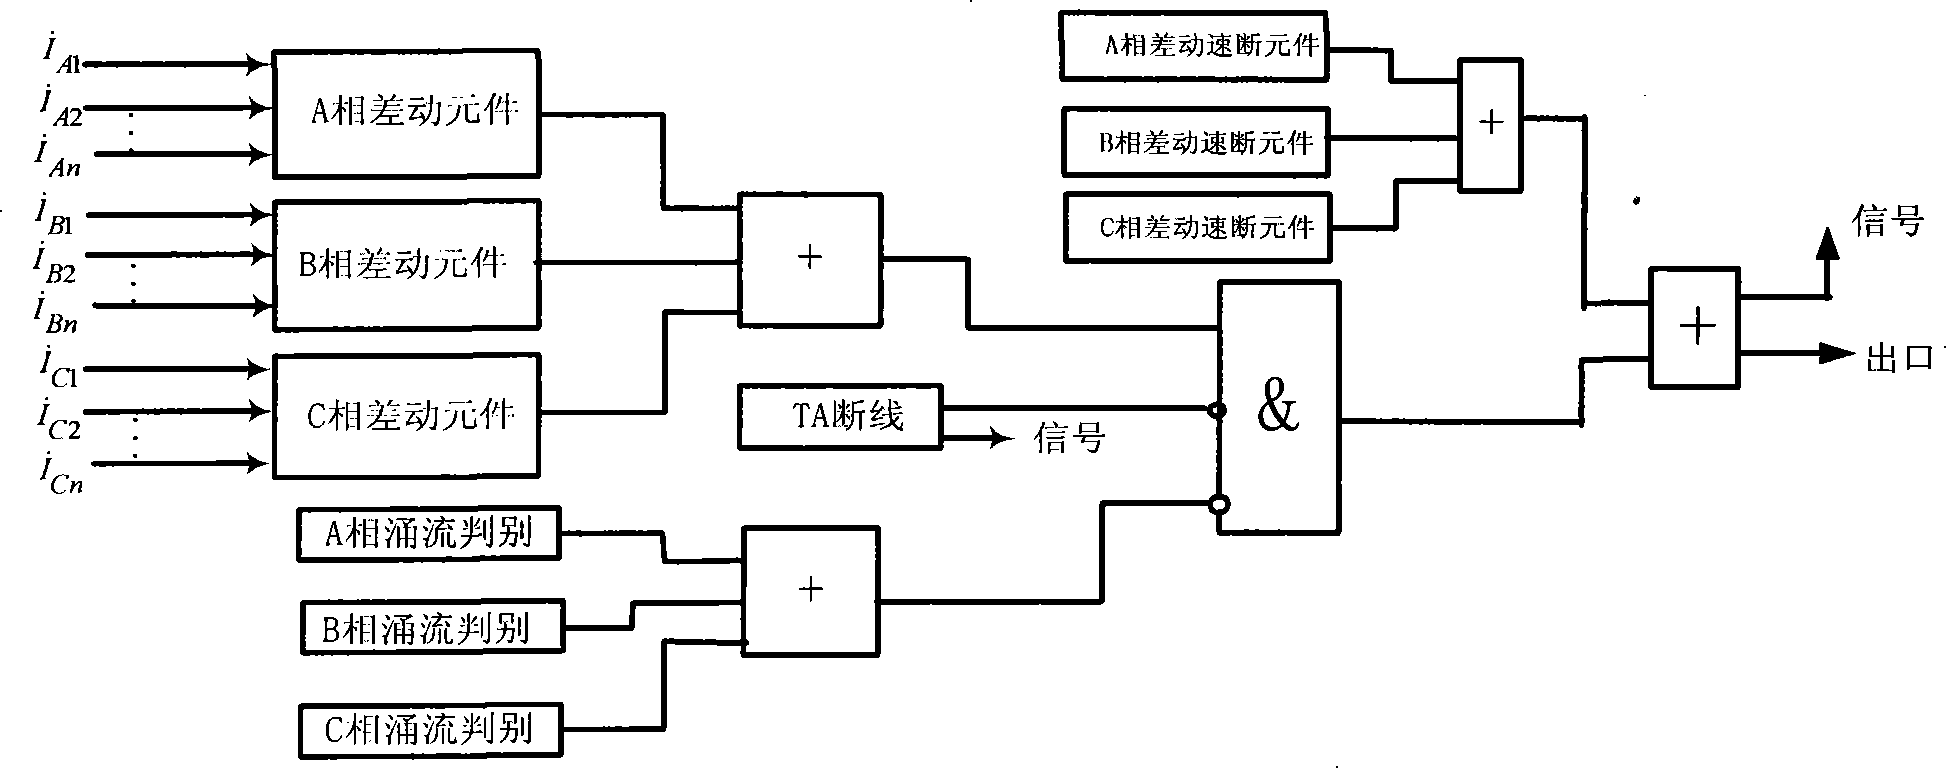 A 8-side transformer differential principle for avoiding CT parallel connection